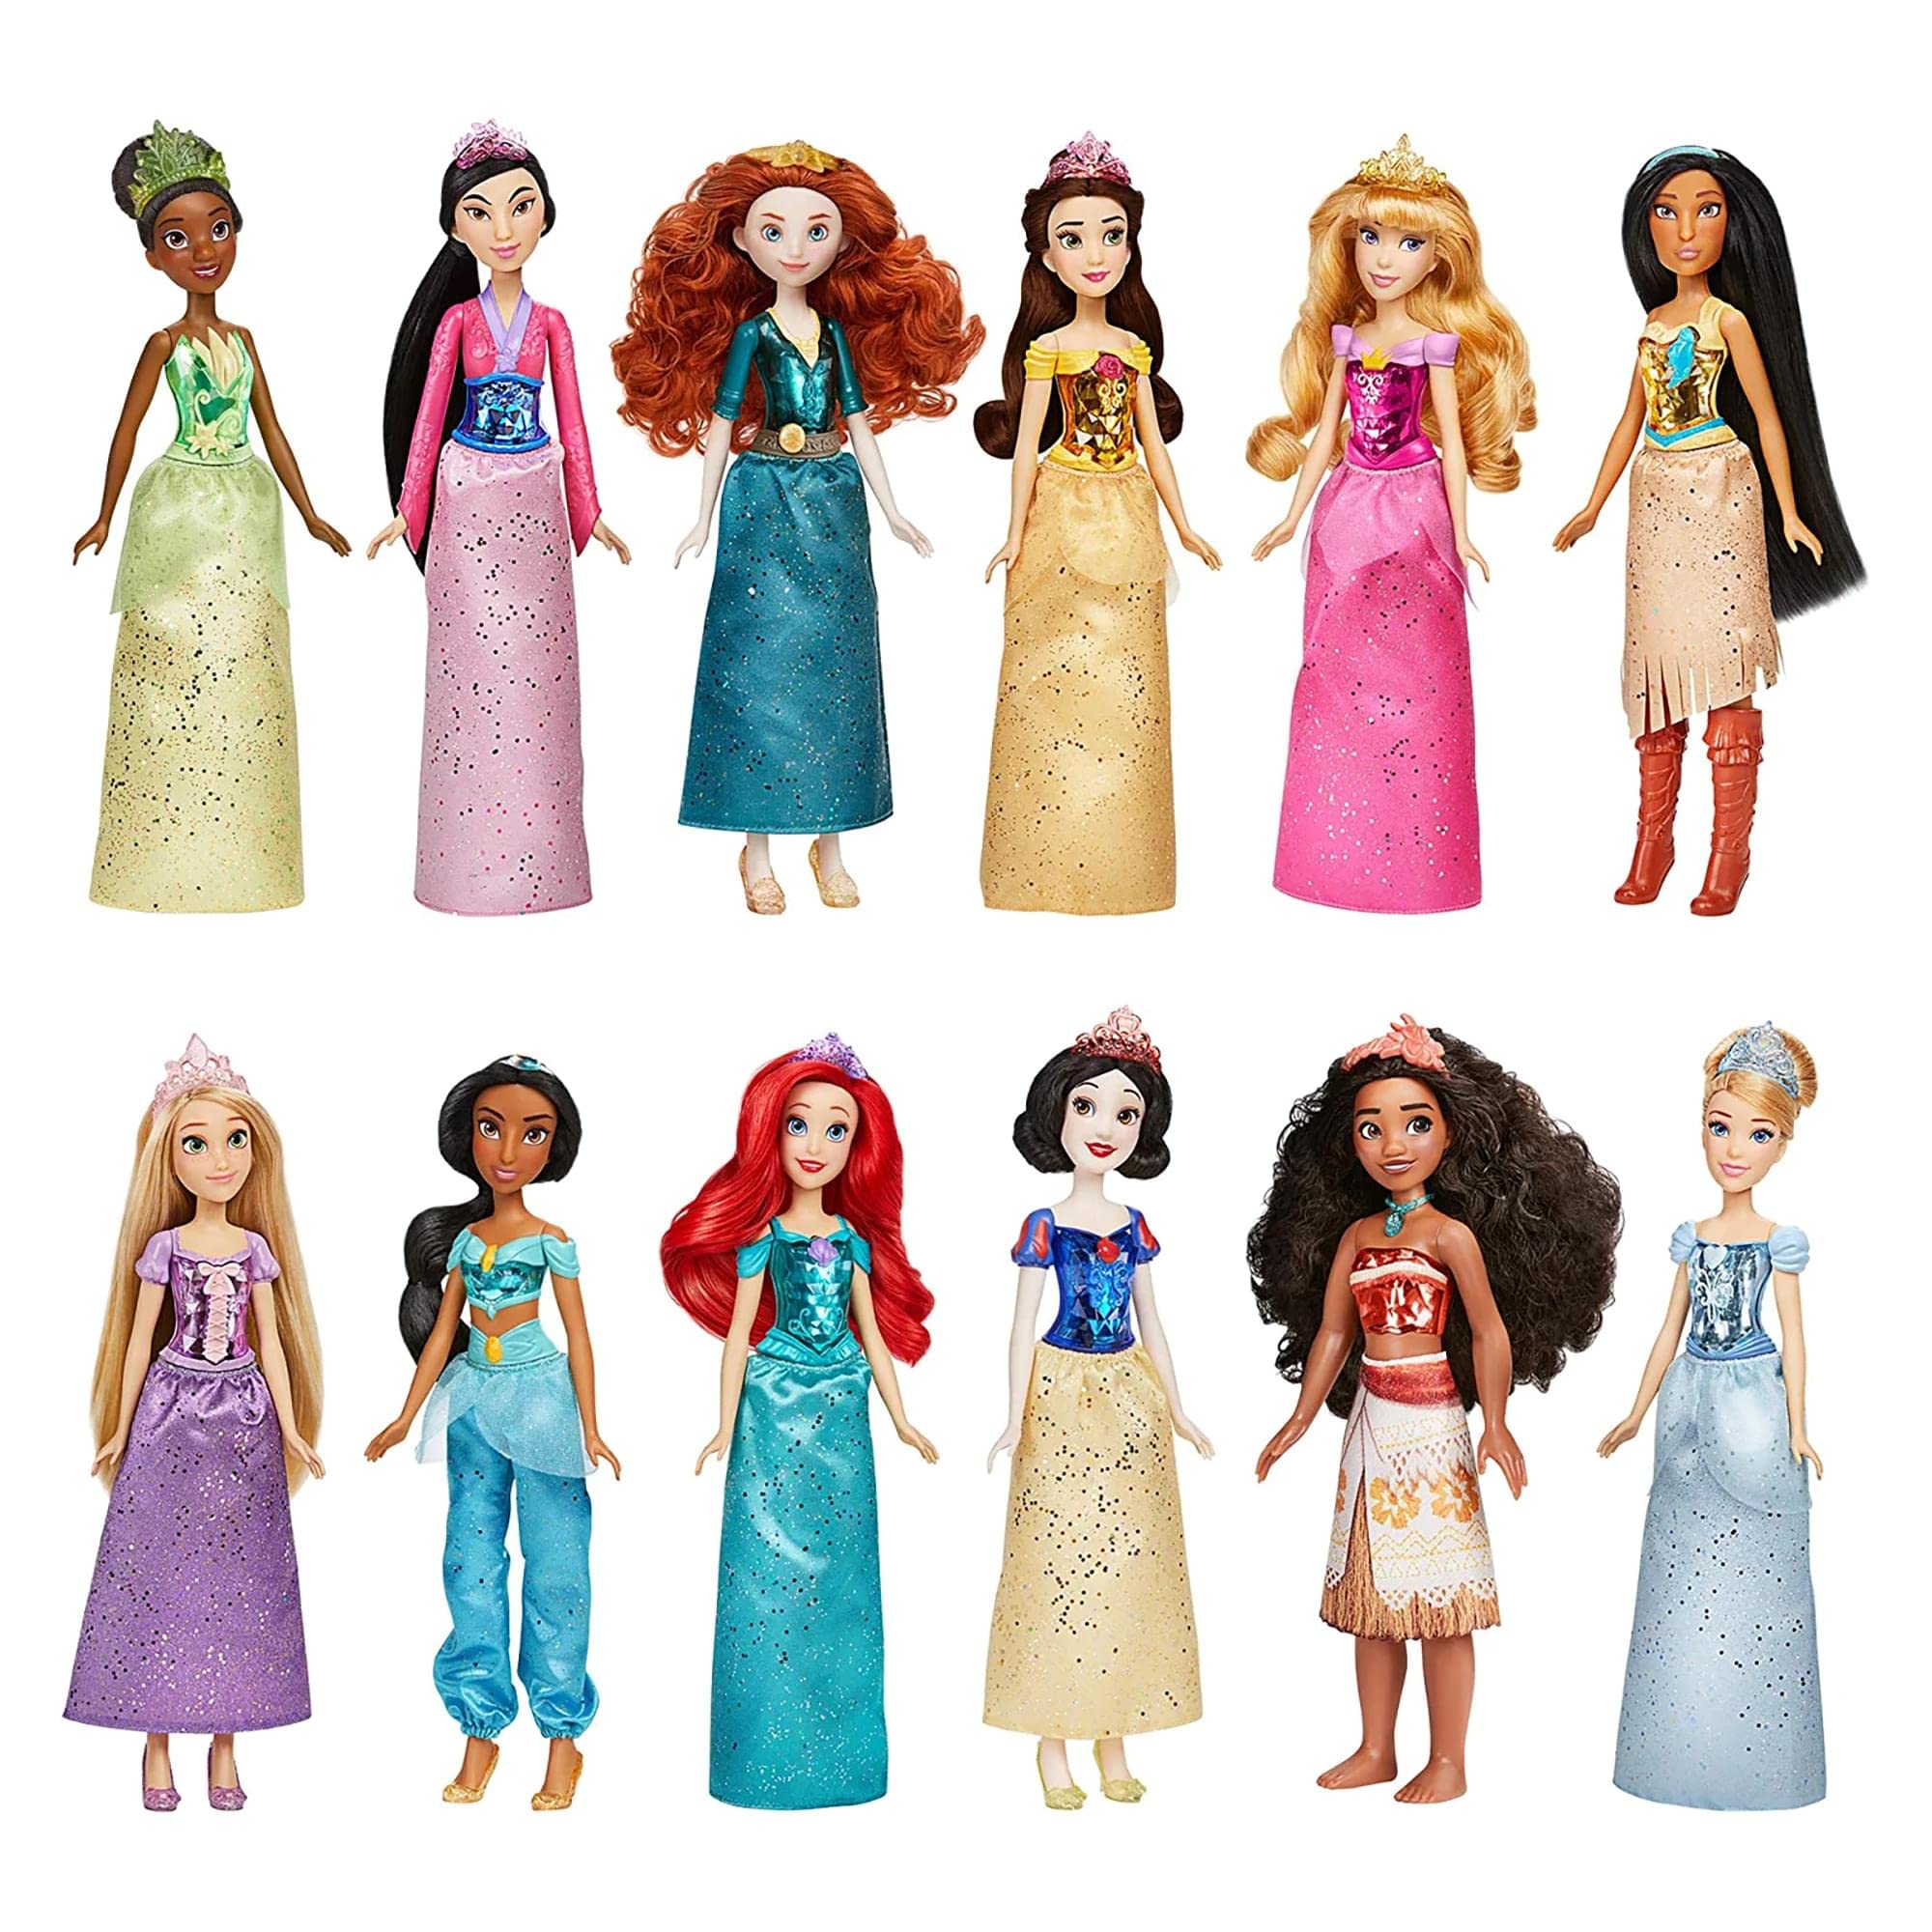 Disney Princess Royal Collection, 12 Royal Shimmer Fashion Dolls with Skirts and Accessories, Toy for Girls 3 Years Old and Up (Amazon Exclusive)